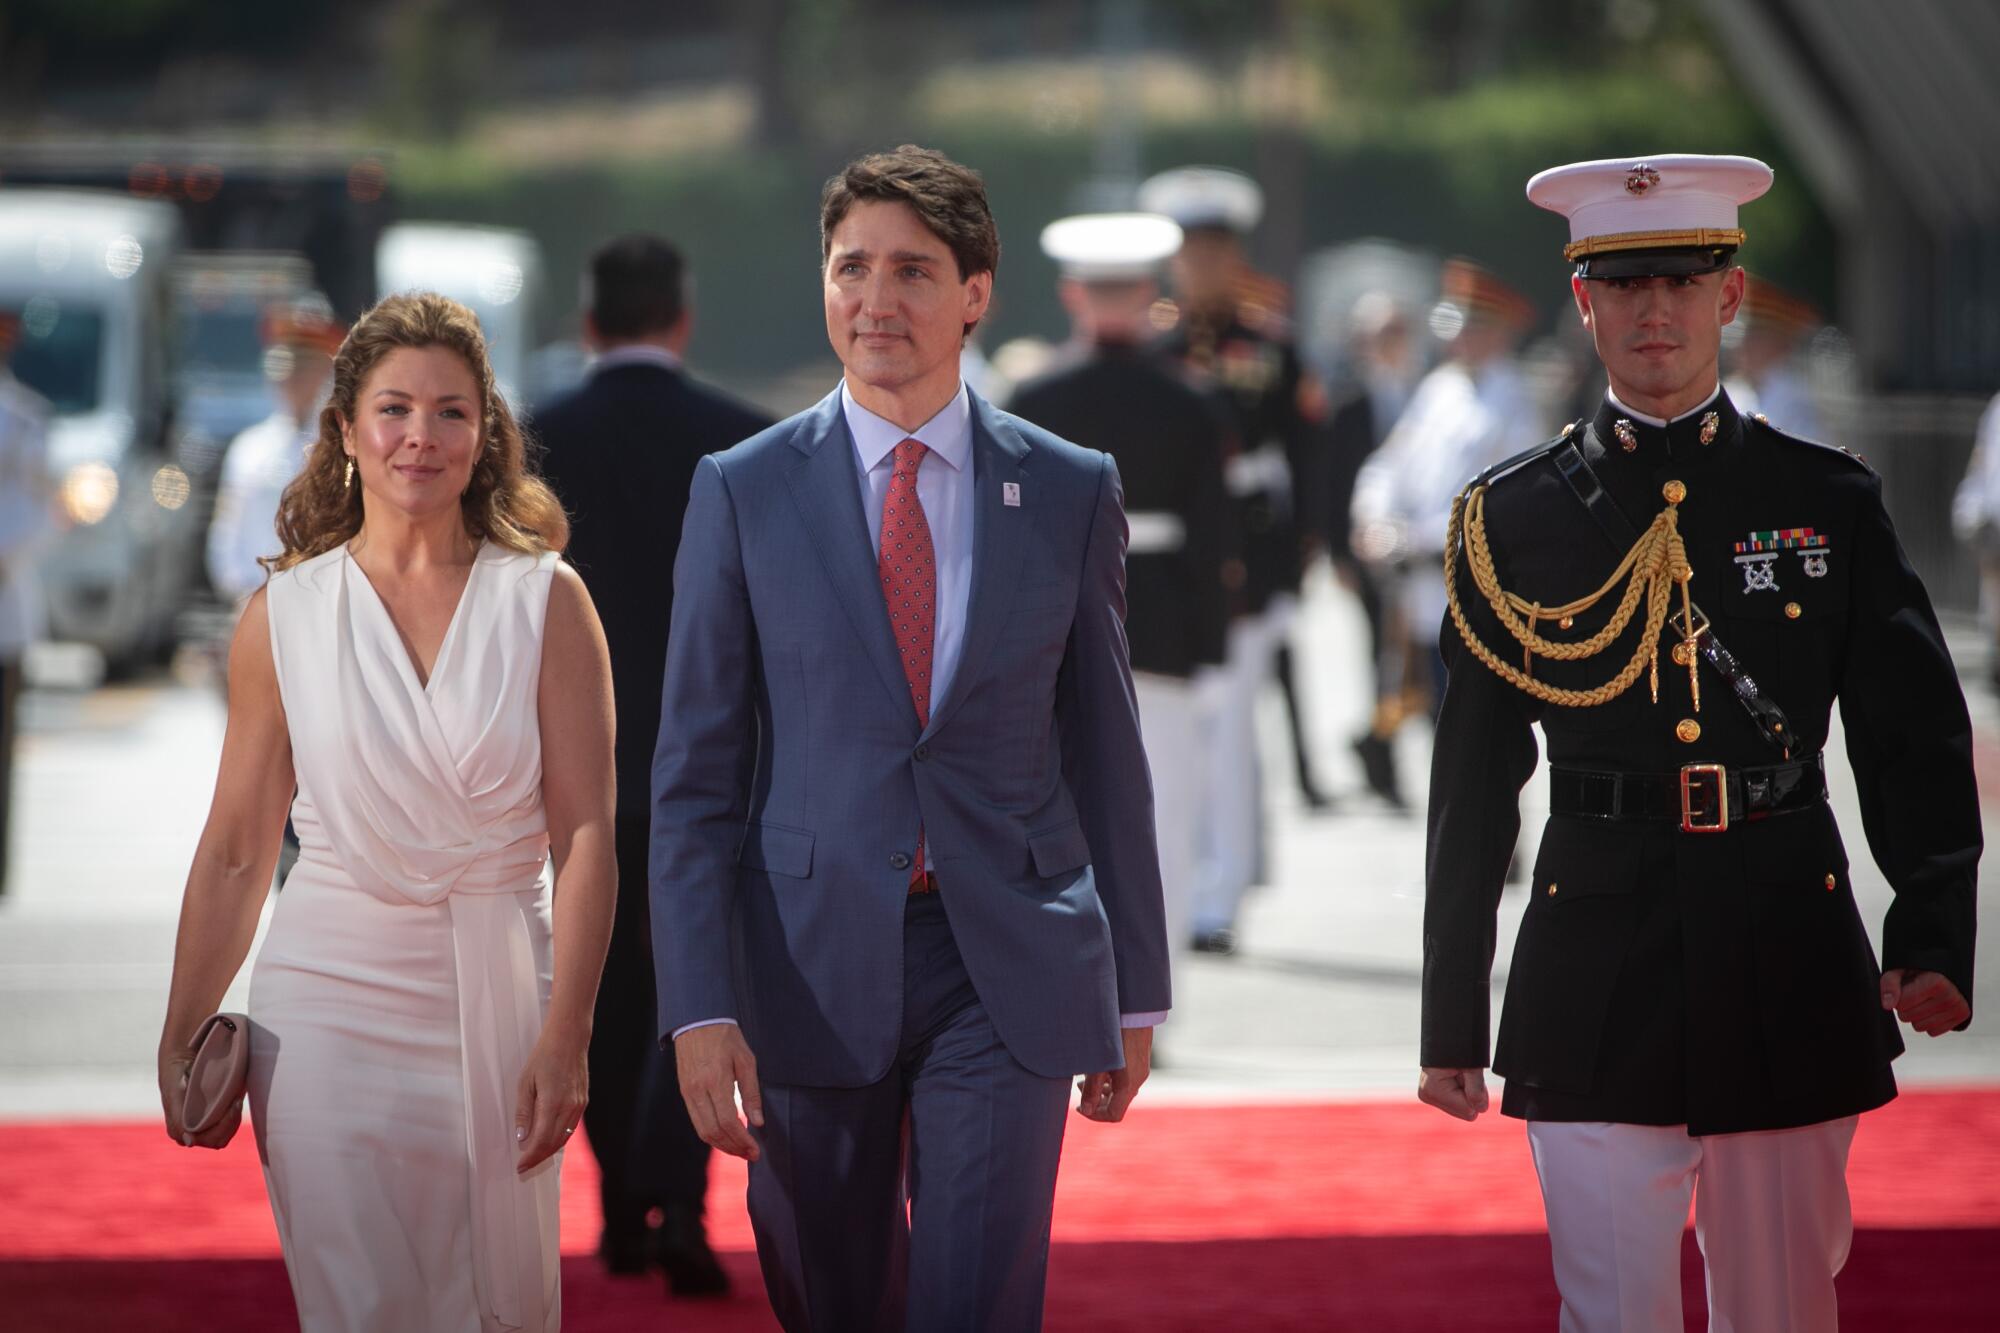 Canadian Prime Minister Justin Trudeau and his wife, Sophie, at the  Summit of the Americas.